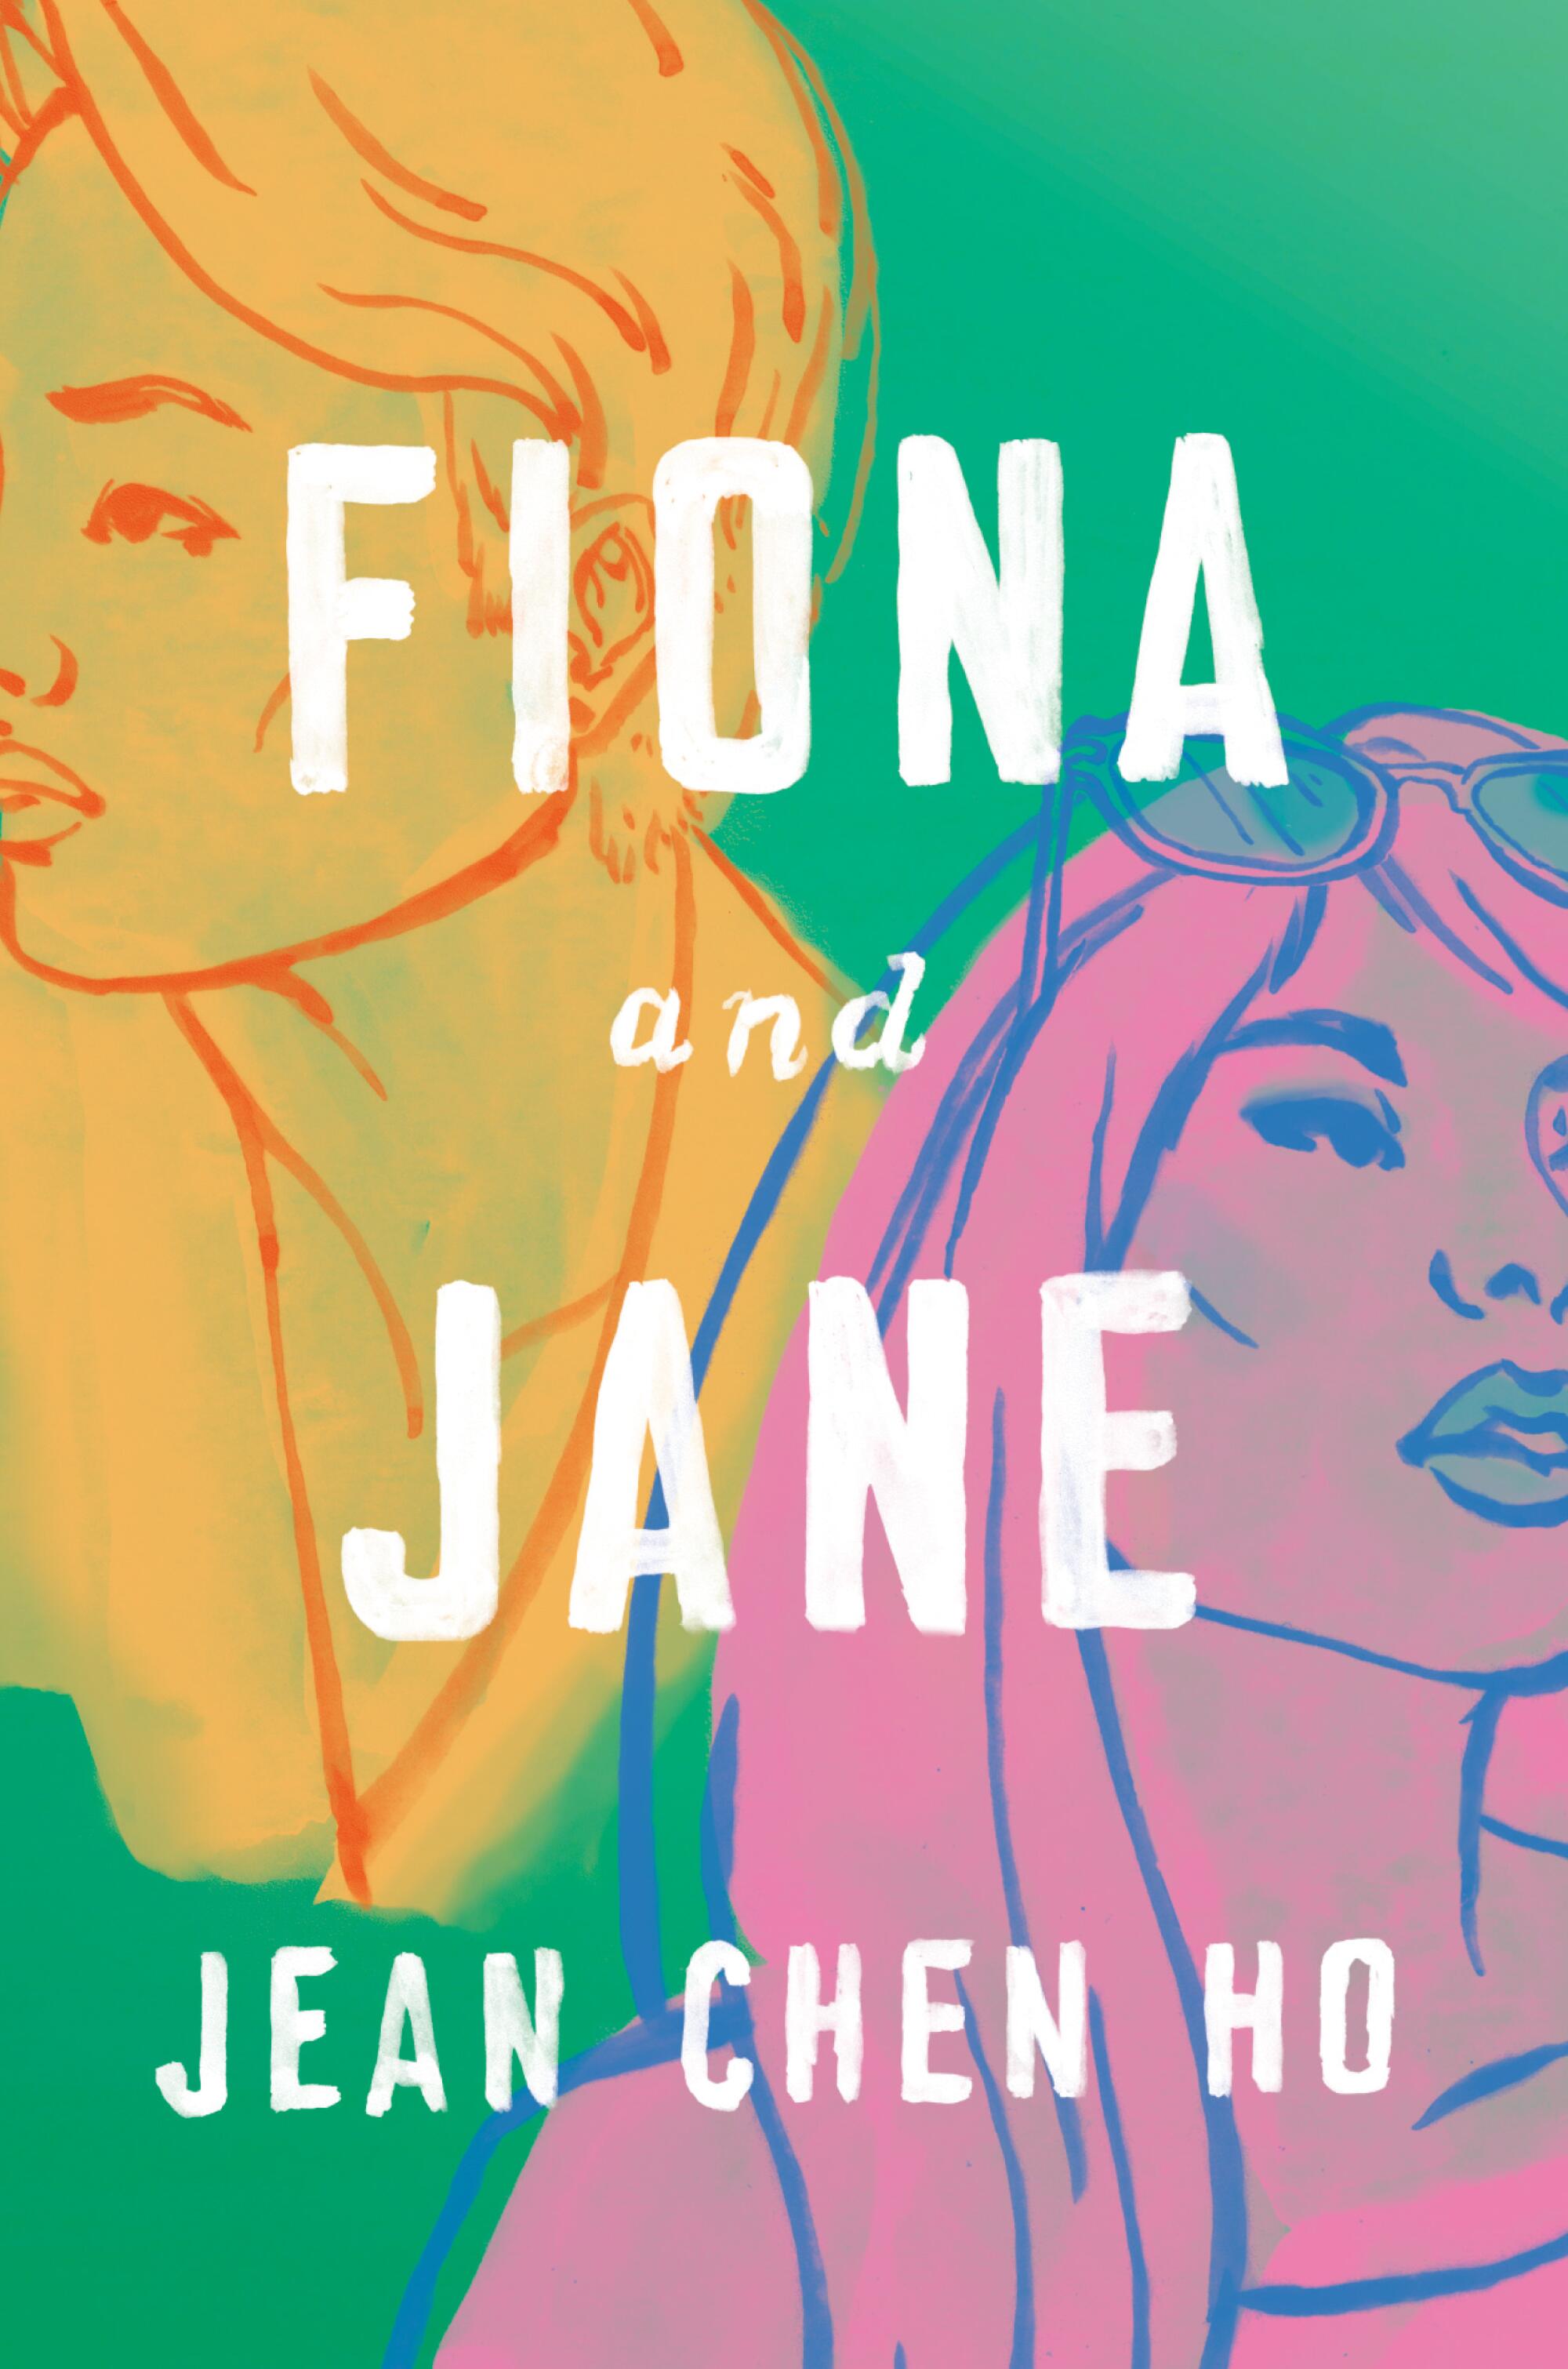 "Fiona and Jane," by Jean Chen Ho